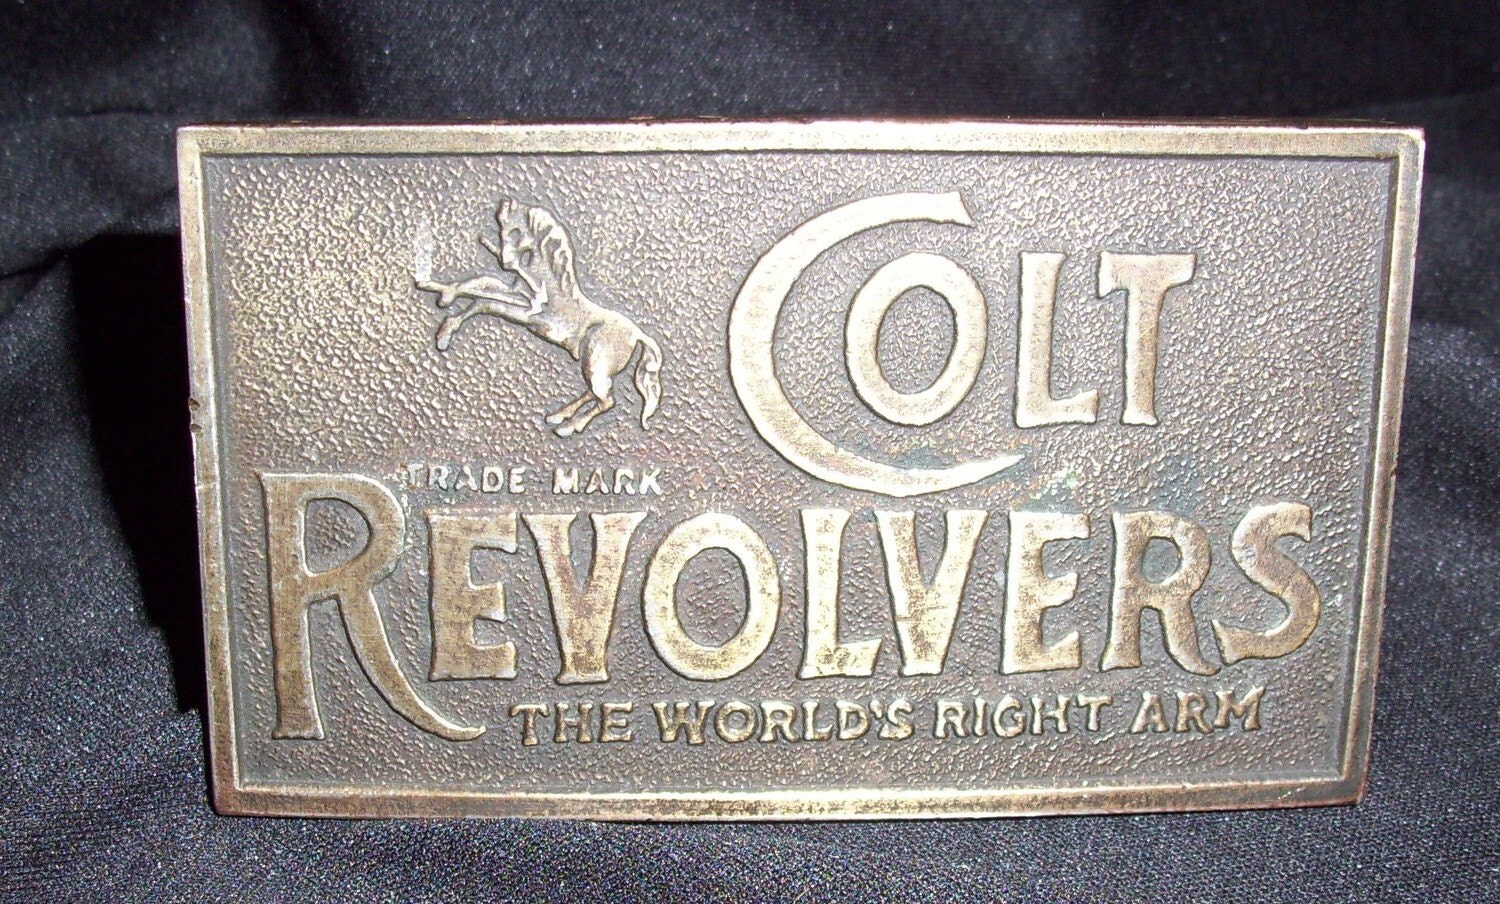 COLT REVOLVERS VINTAGE MENS BELT BUCKLE by Thesewingcottageusa